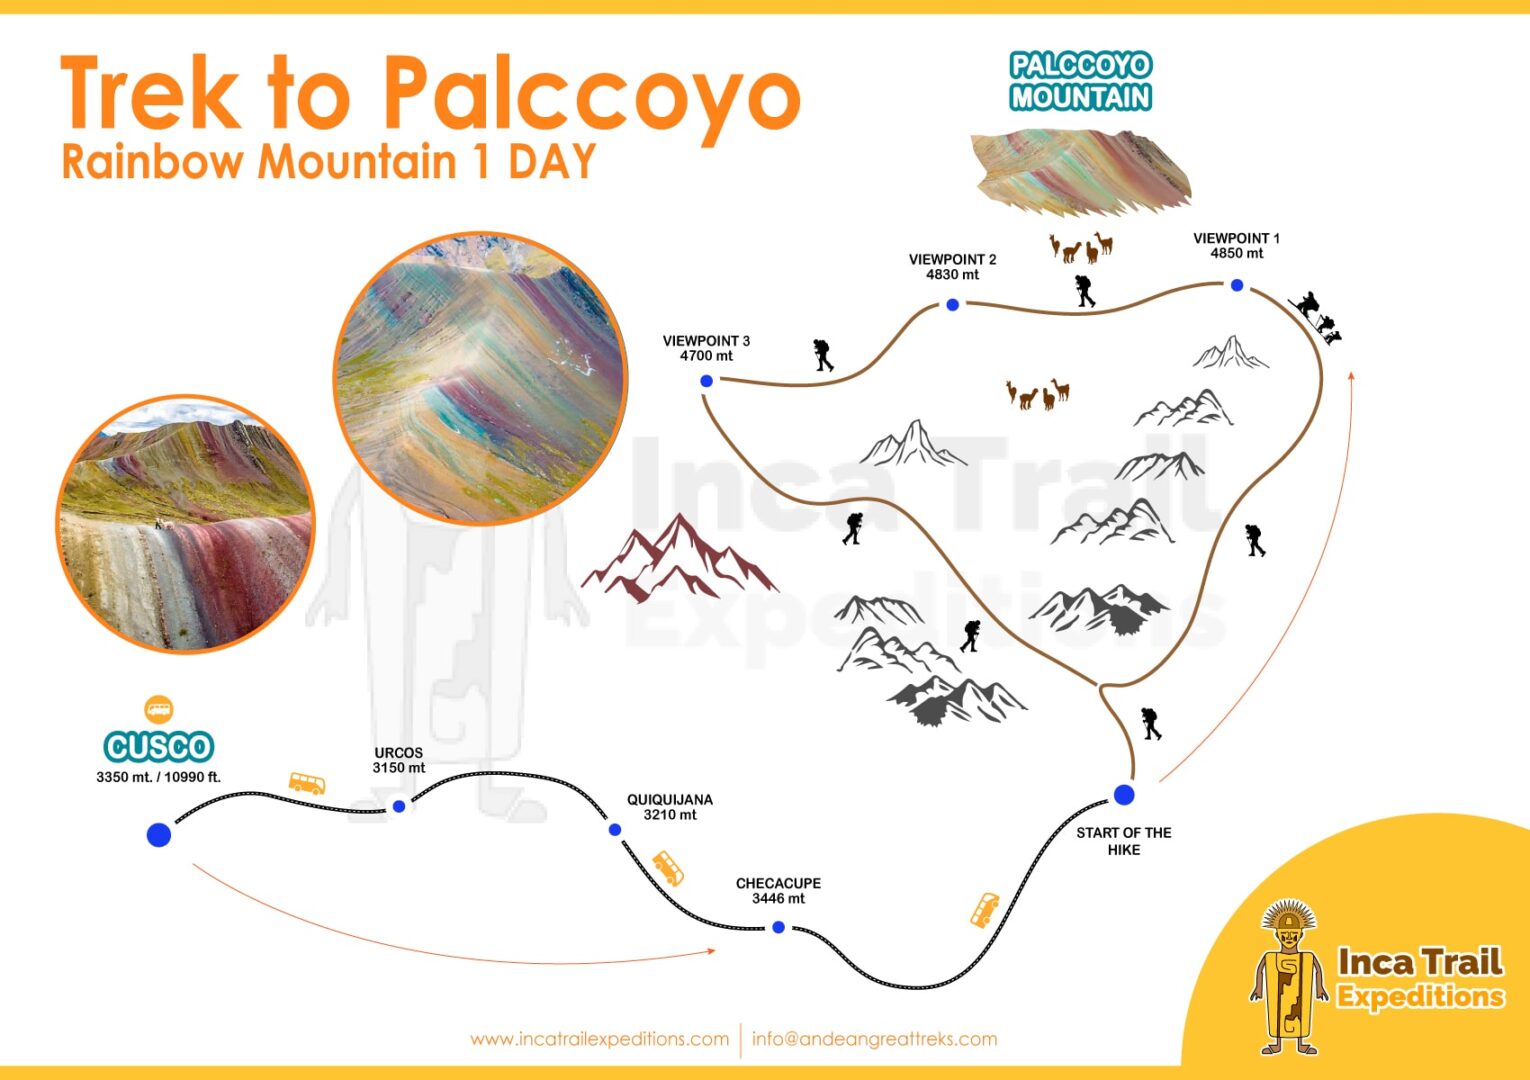 PALCCOYO-MOUNTAIN-BY-INCA-TRAIL-EXPEDITIONS